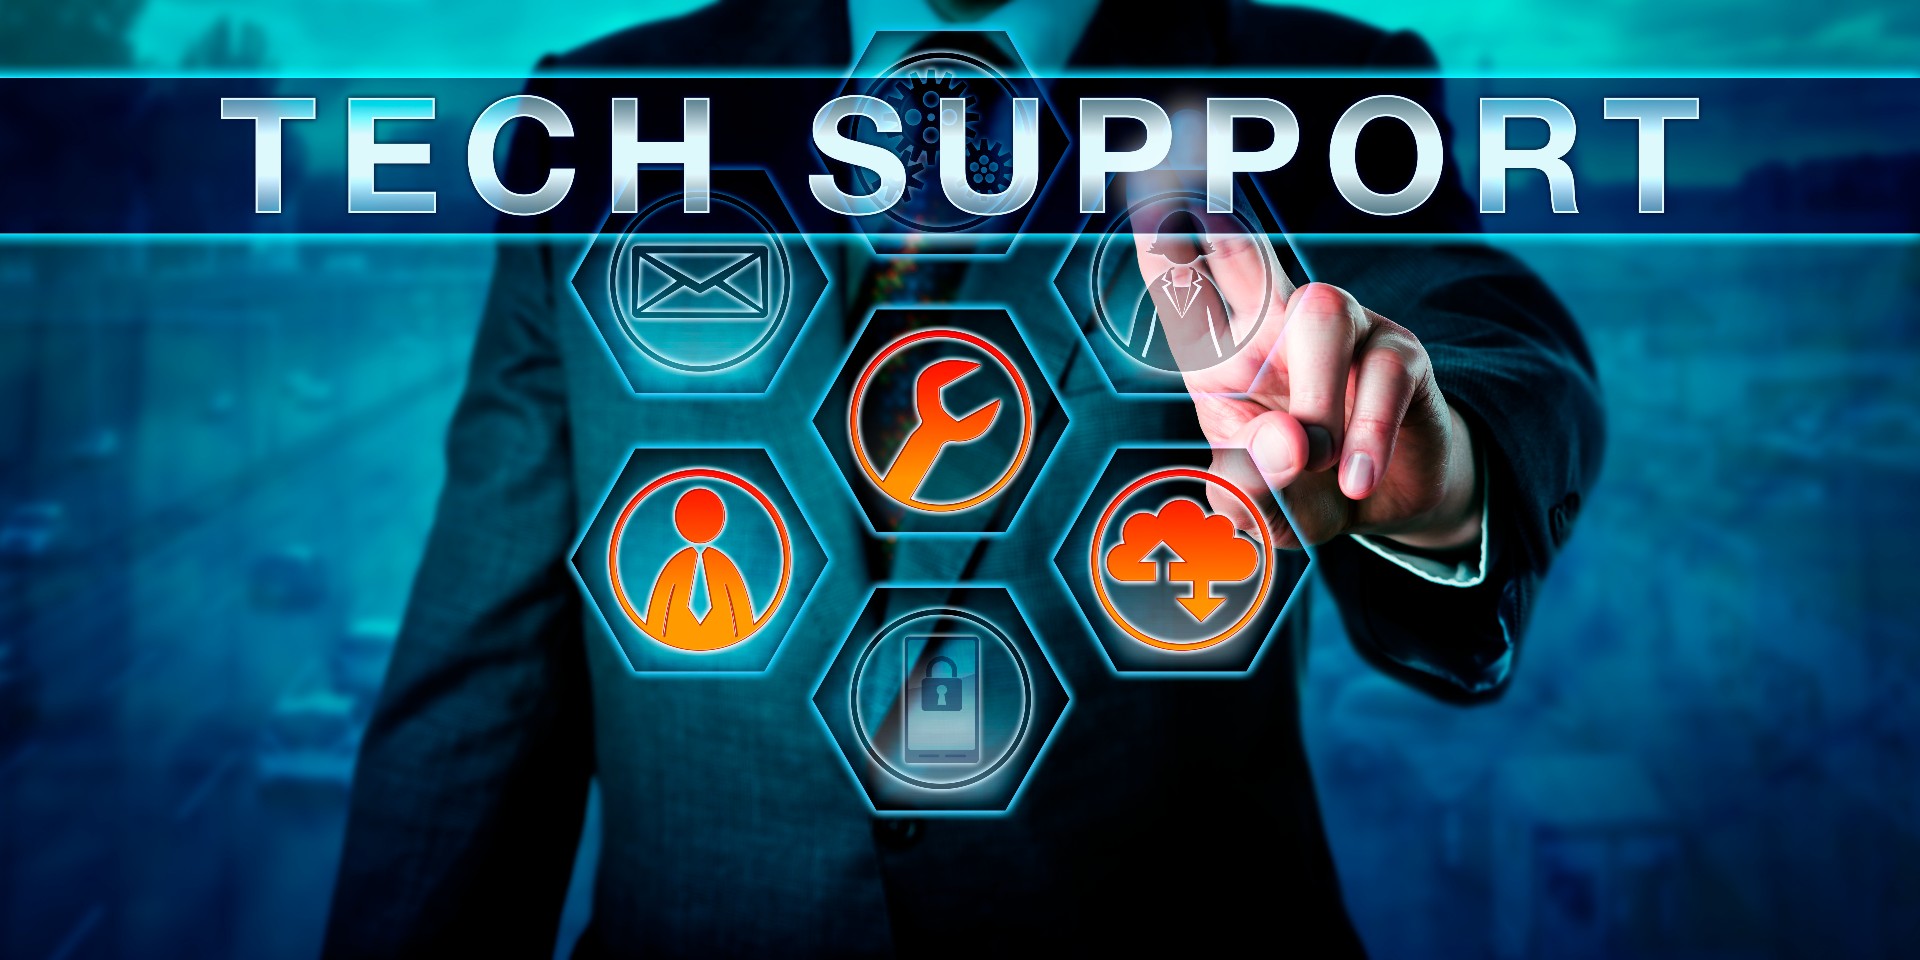 A body shot of a man in a suit reaching out and touching a comb of graphics with the word 'Tech Support' over them.